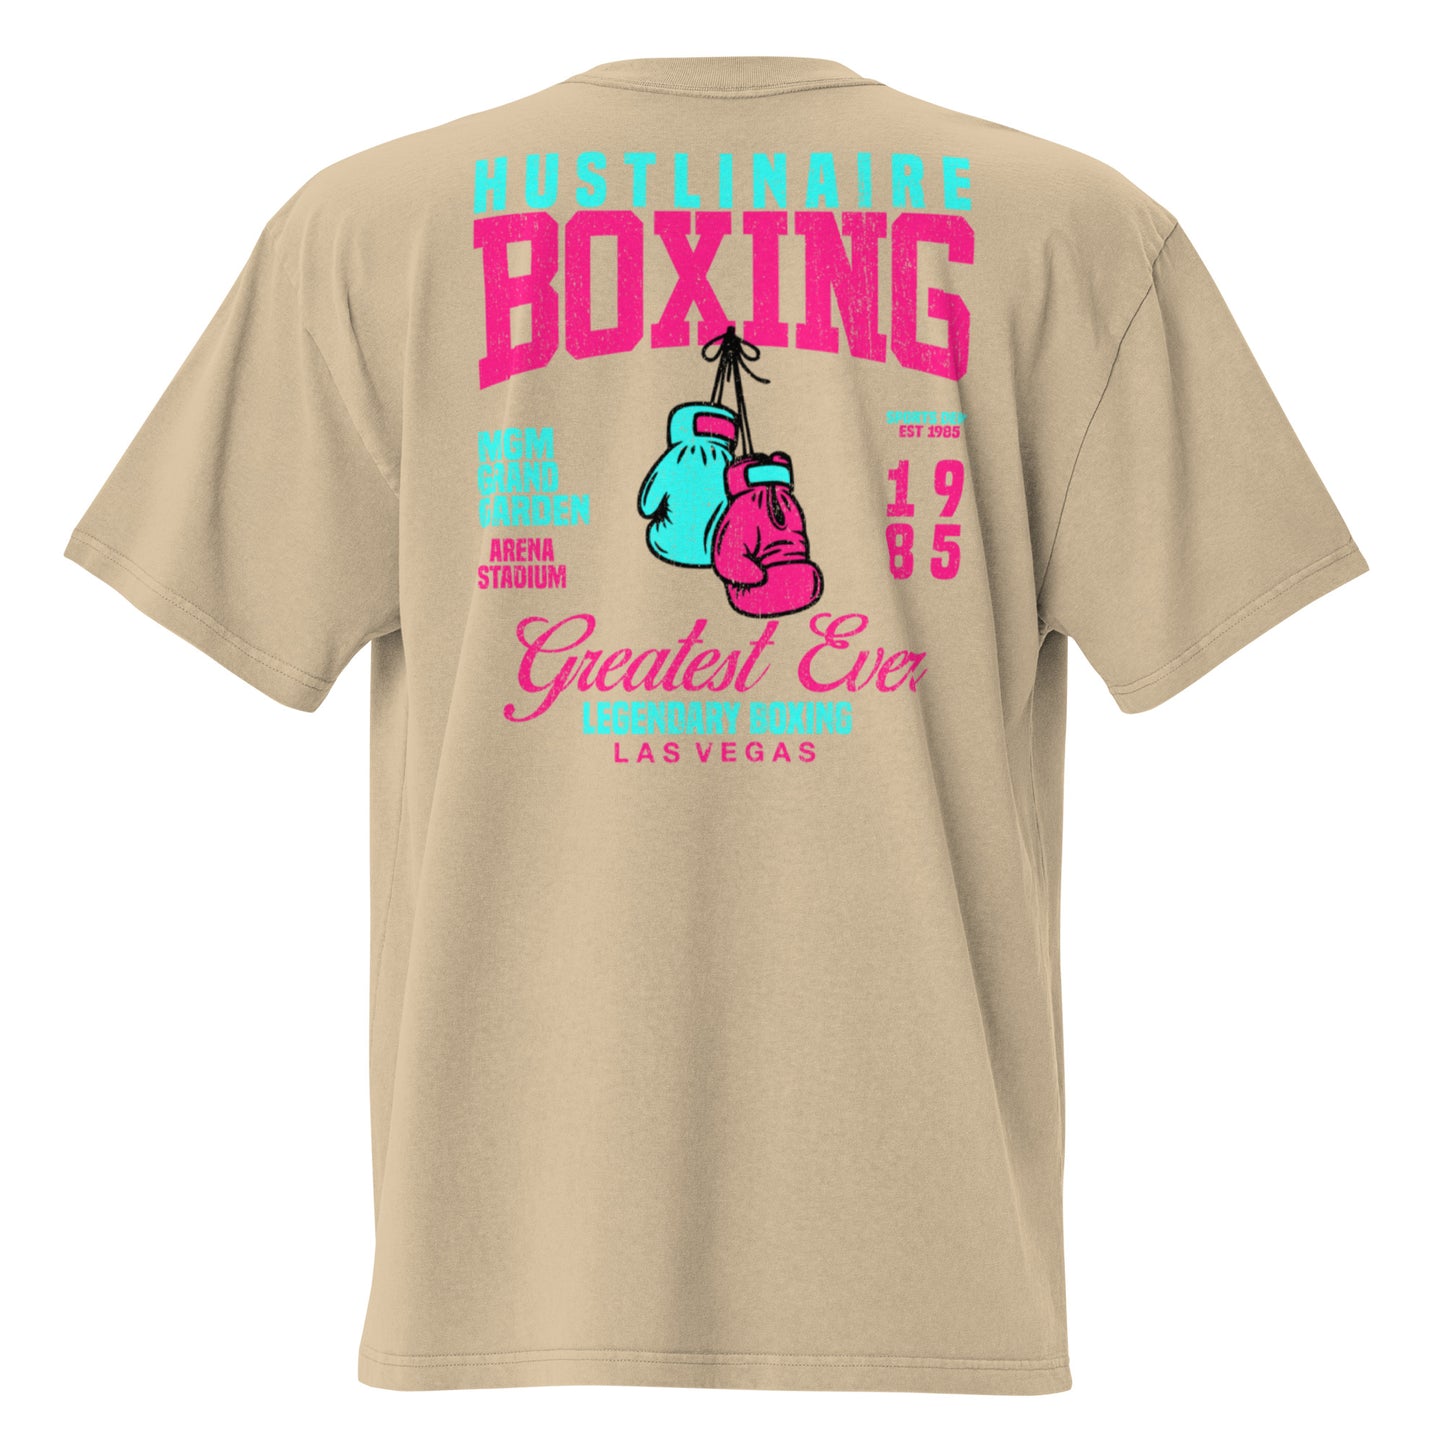 Hustlinaire Boxing Greatest Ever Oversized faded t-shirt